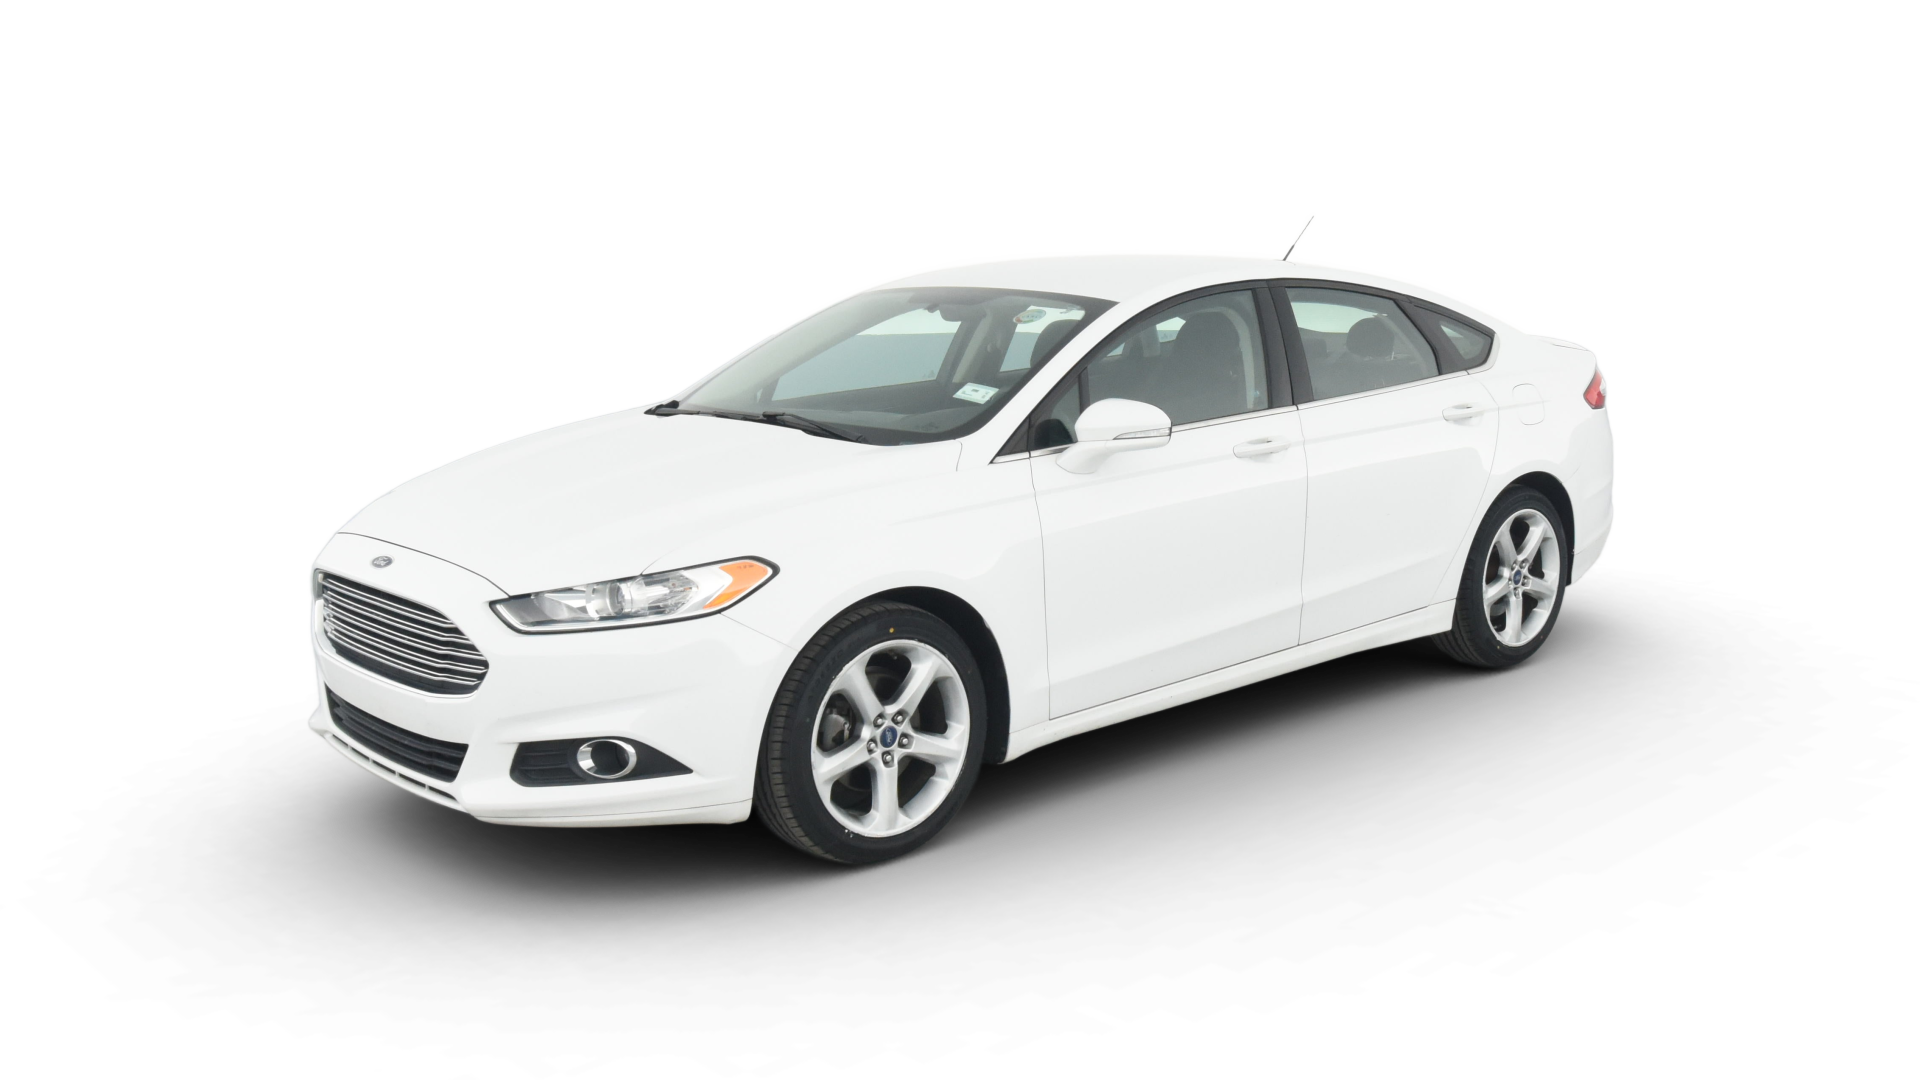 Used Ford Fusion For Sale Online | Carvana